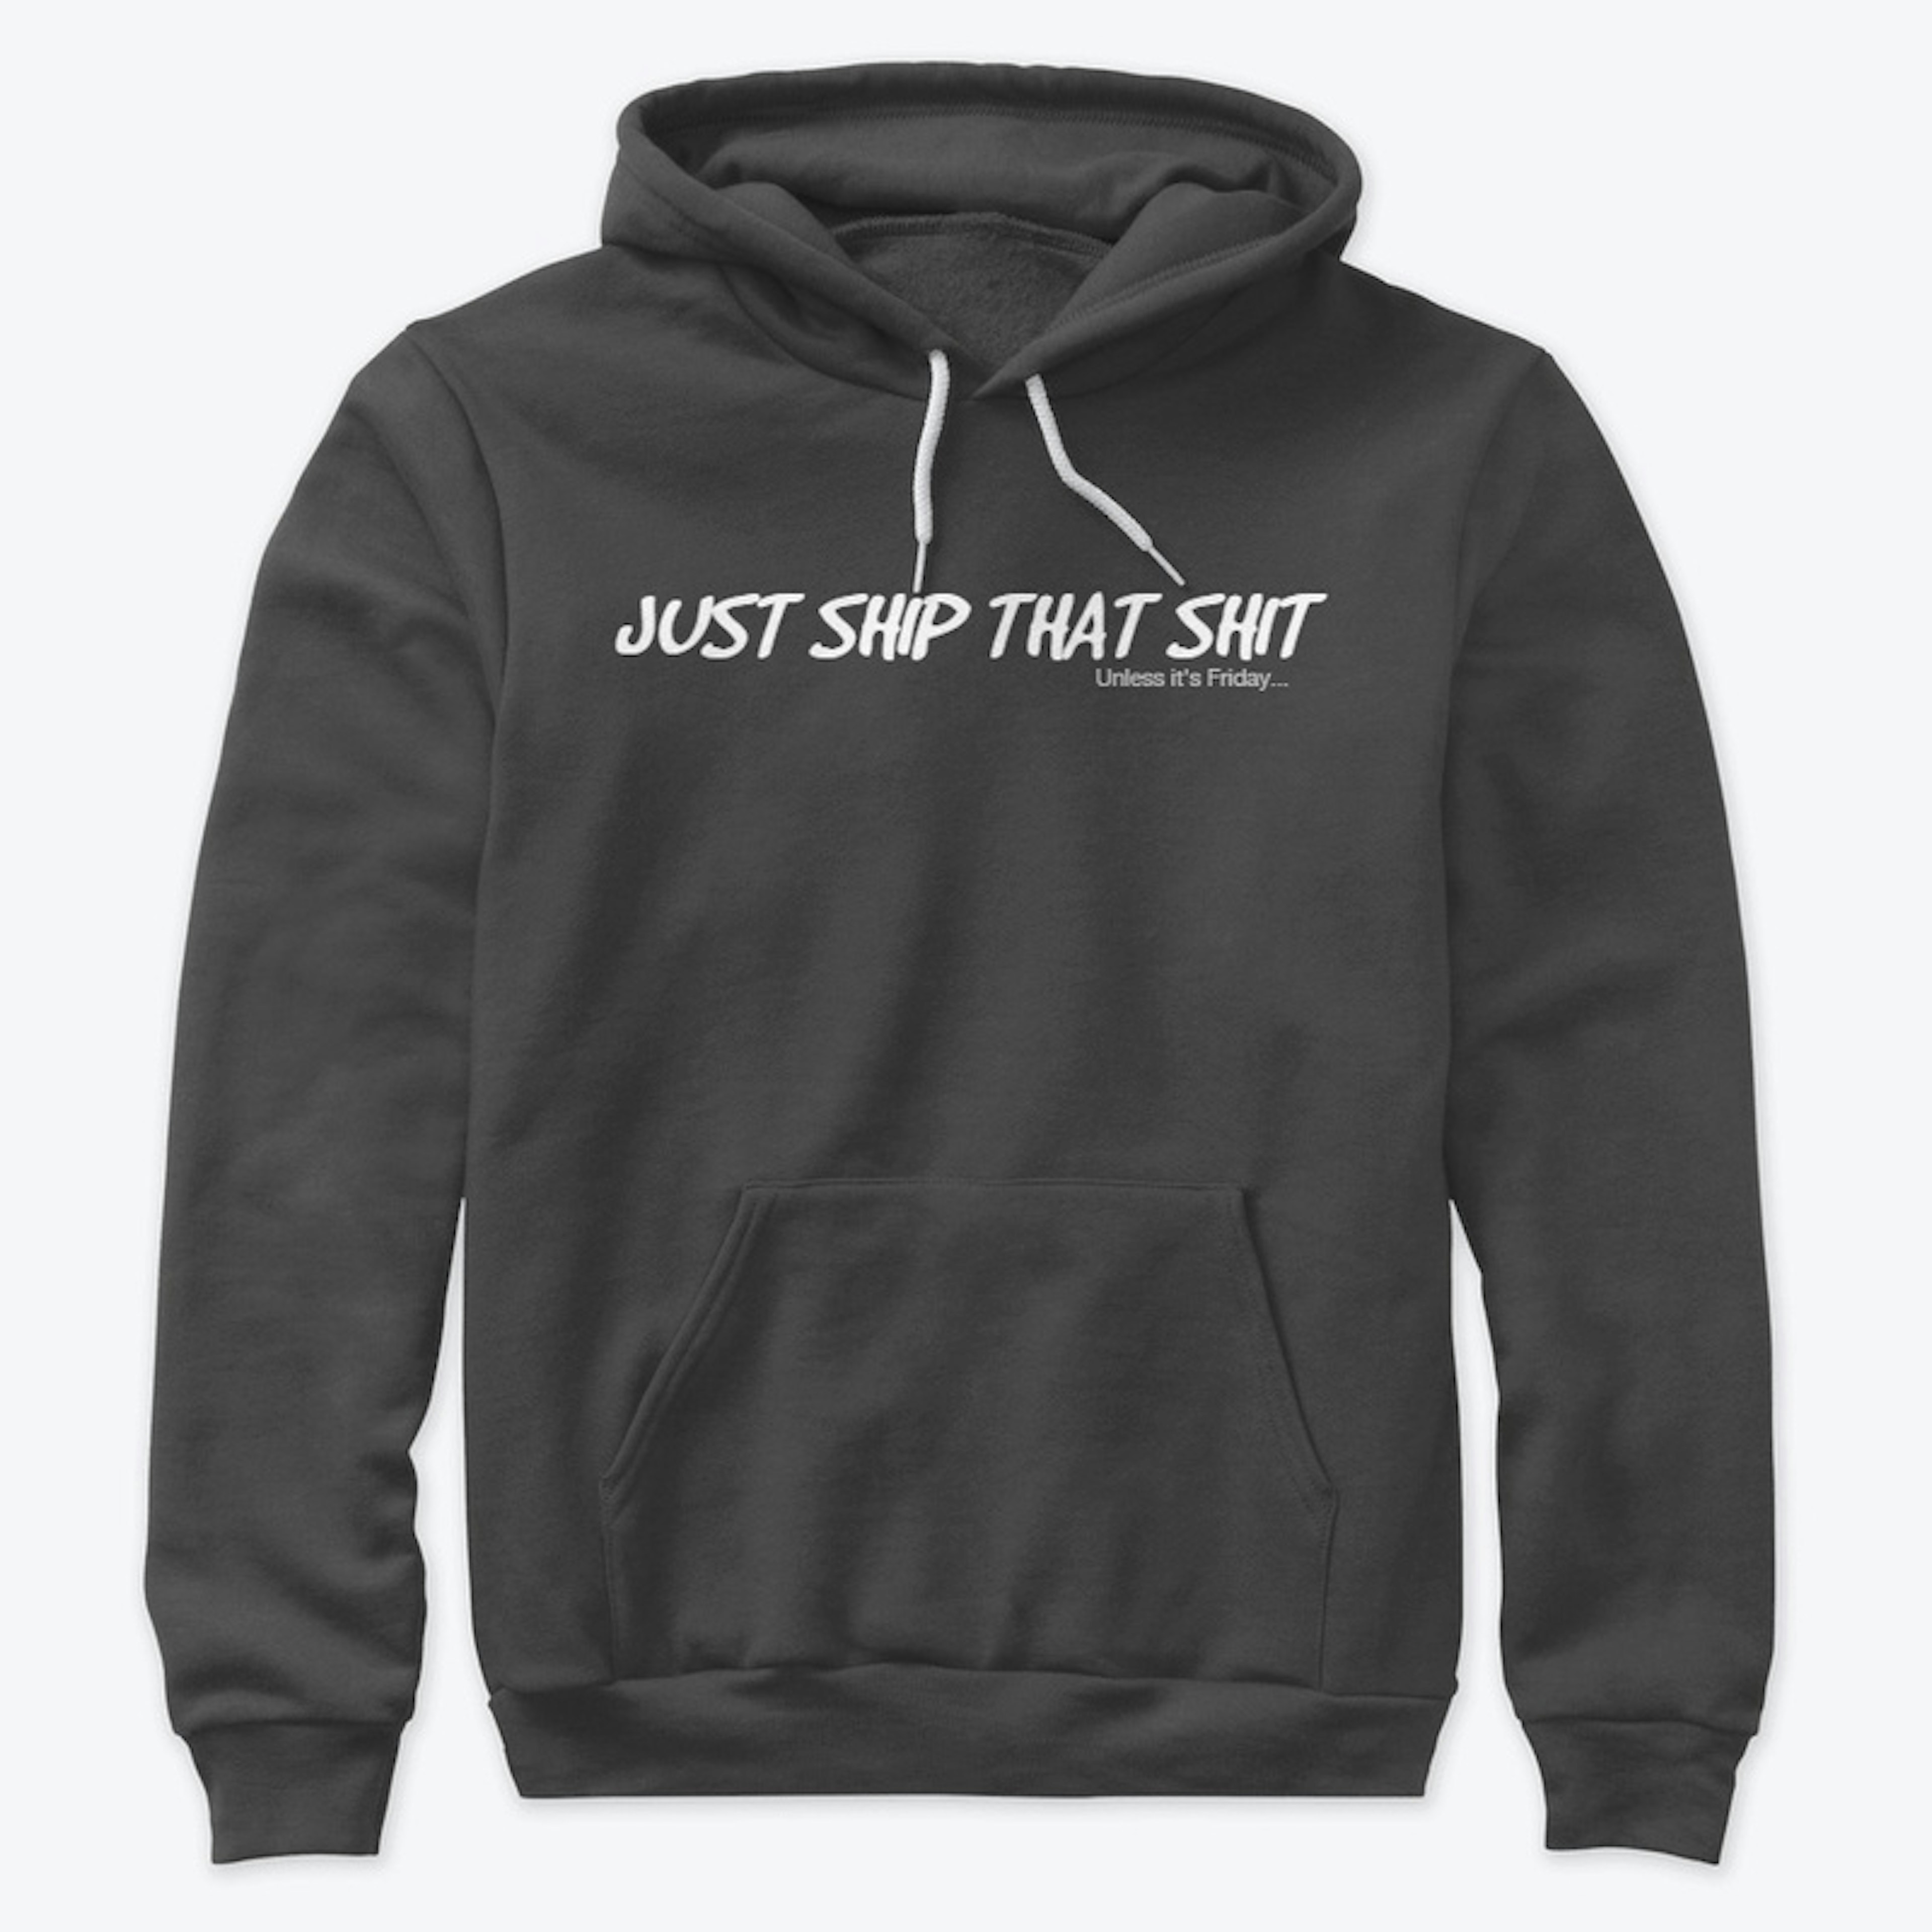 Just ship that sh*t